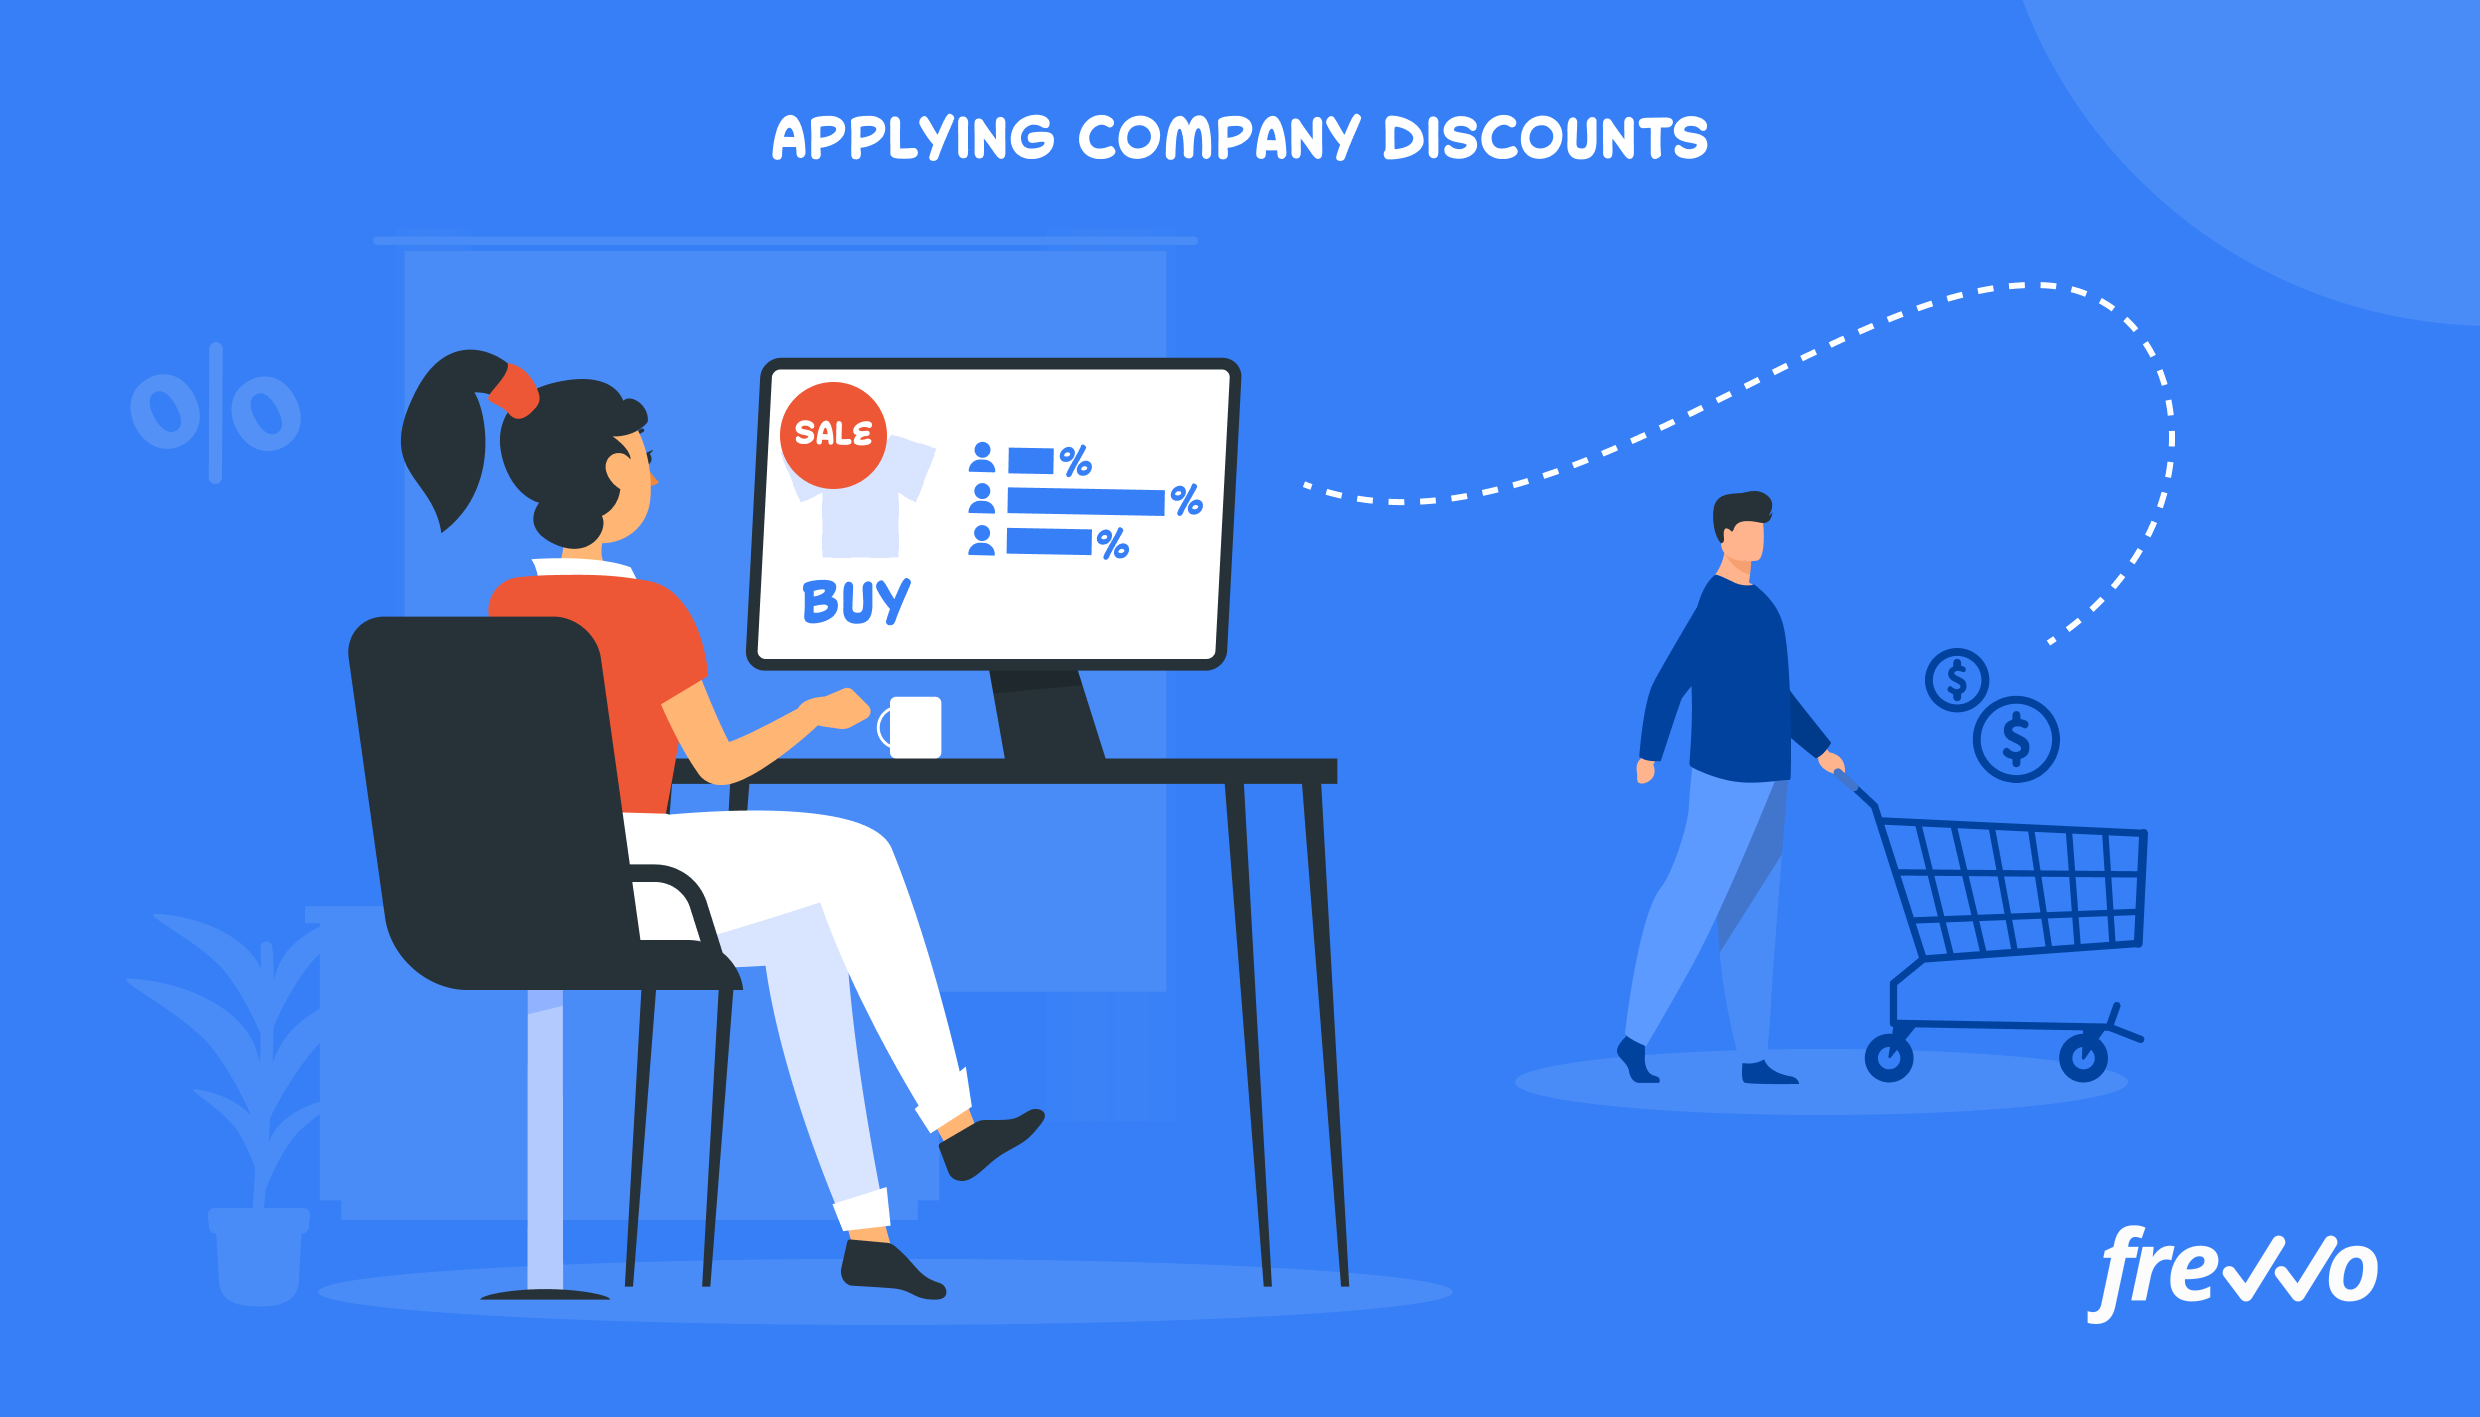 Using business rules to apply company discounts